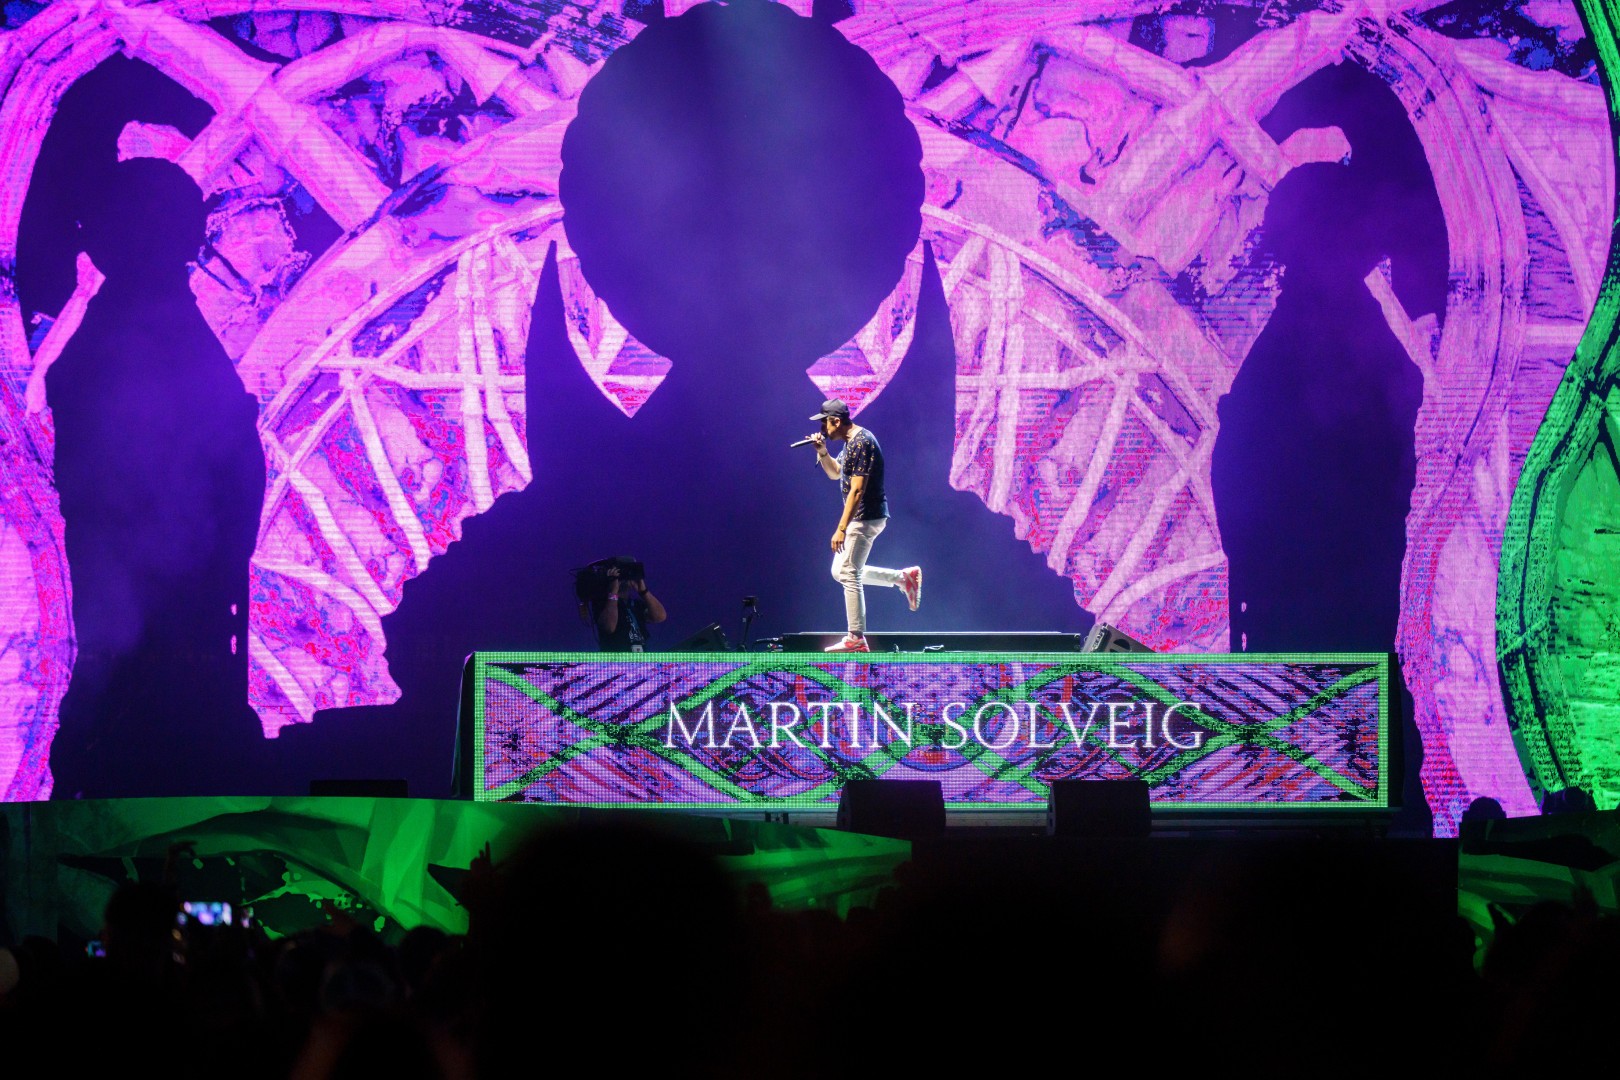 Martin Solveig at Cluj Arena in Cluj-Napoca on September 12, 2021